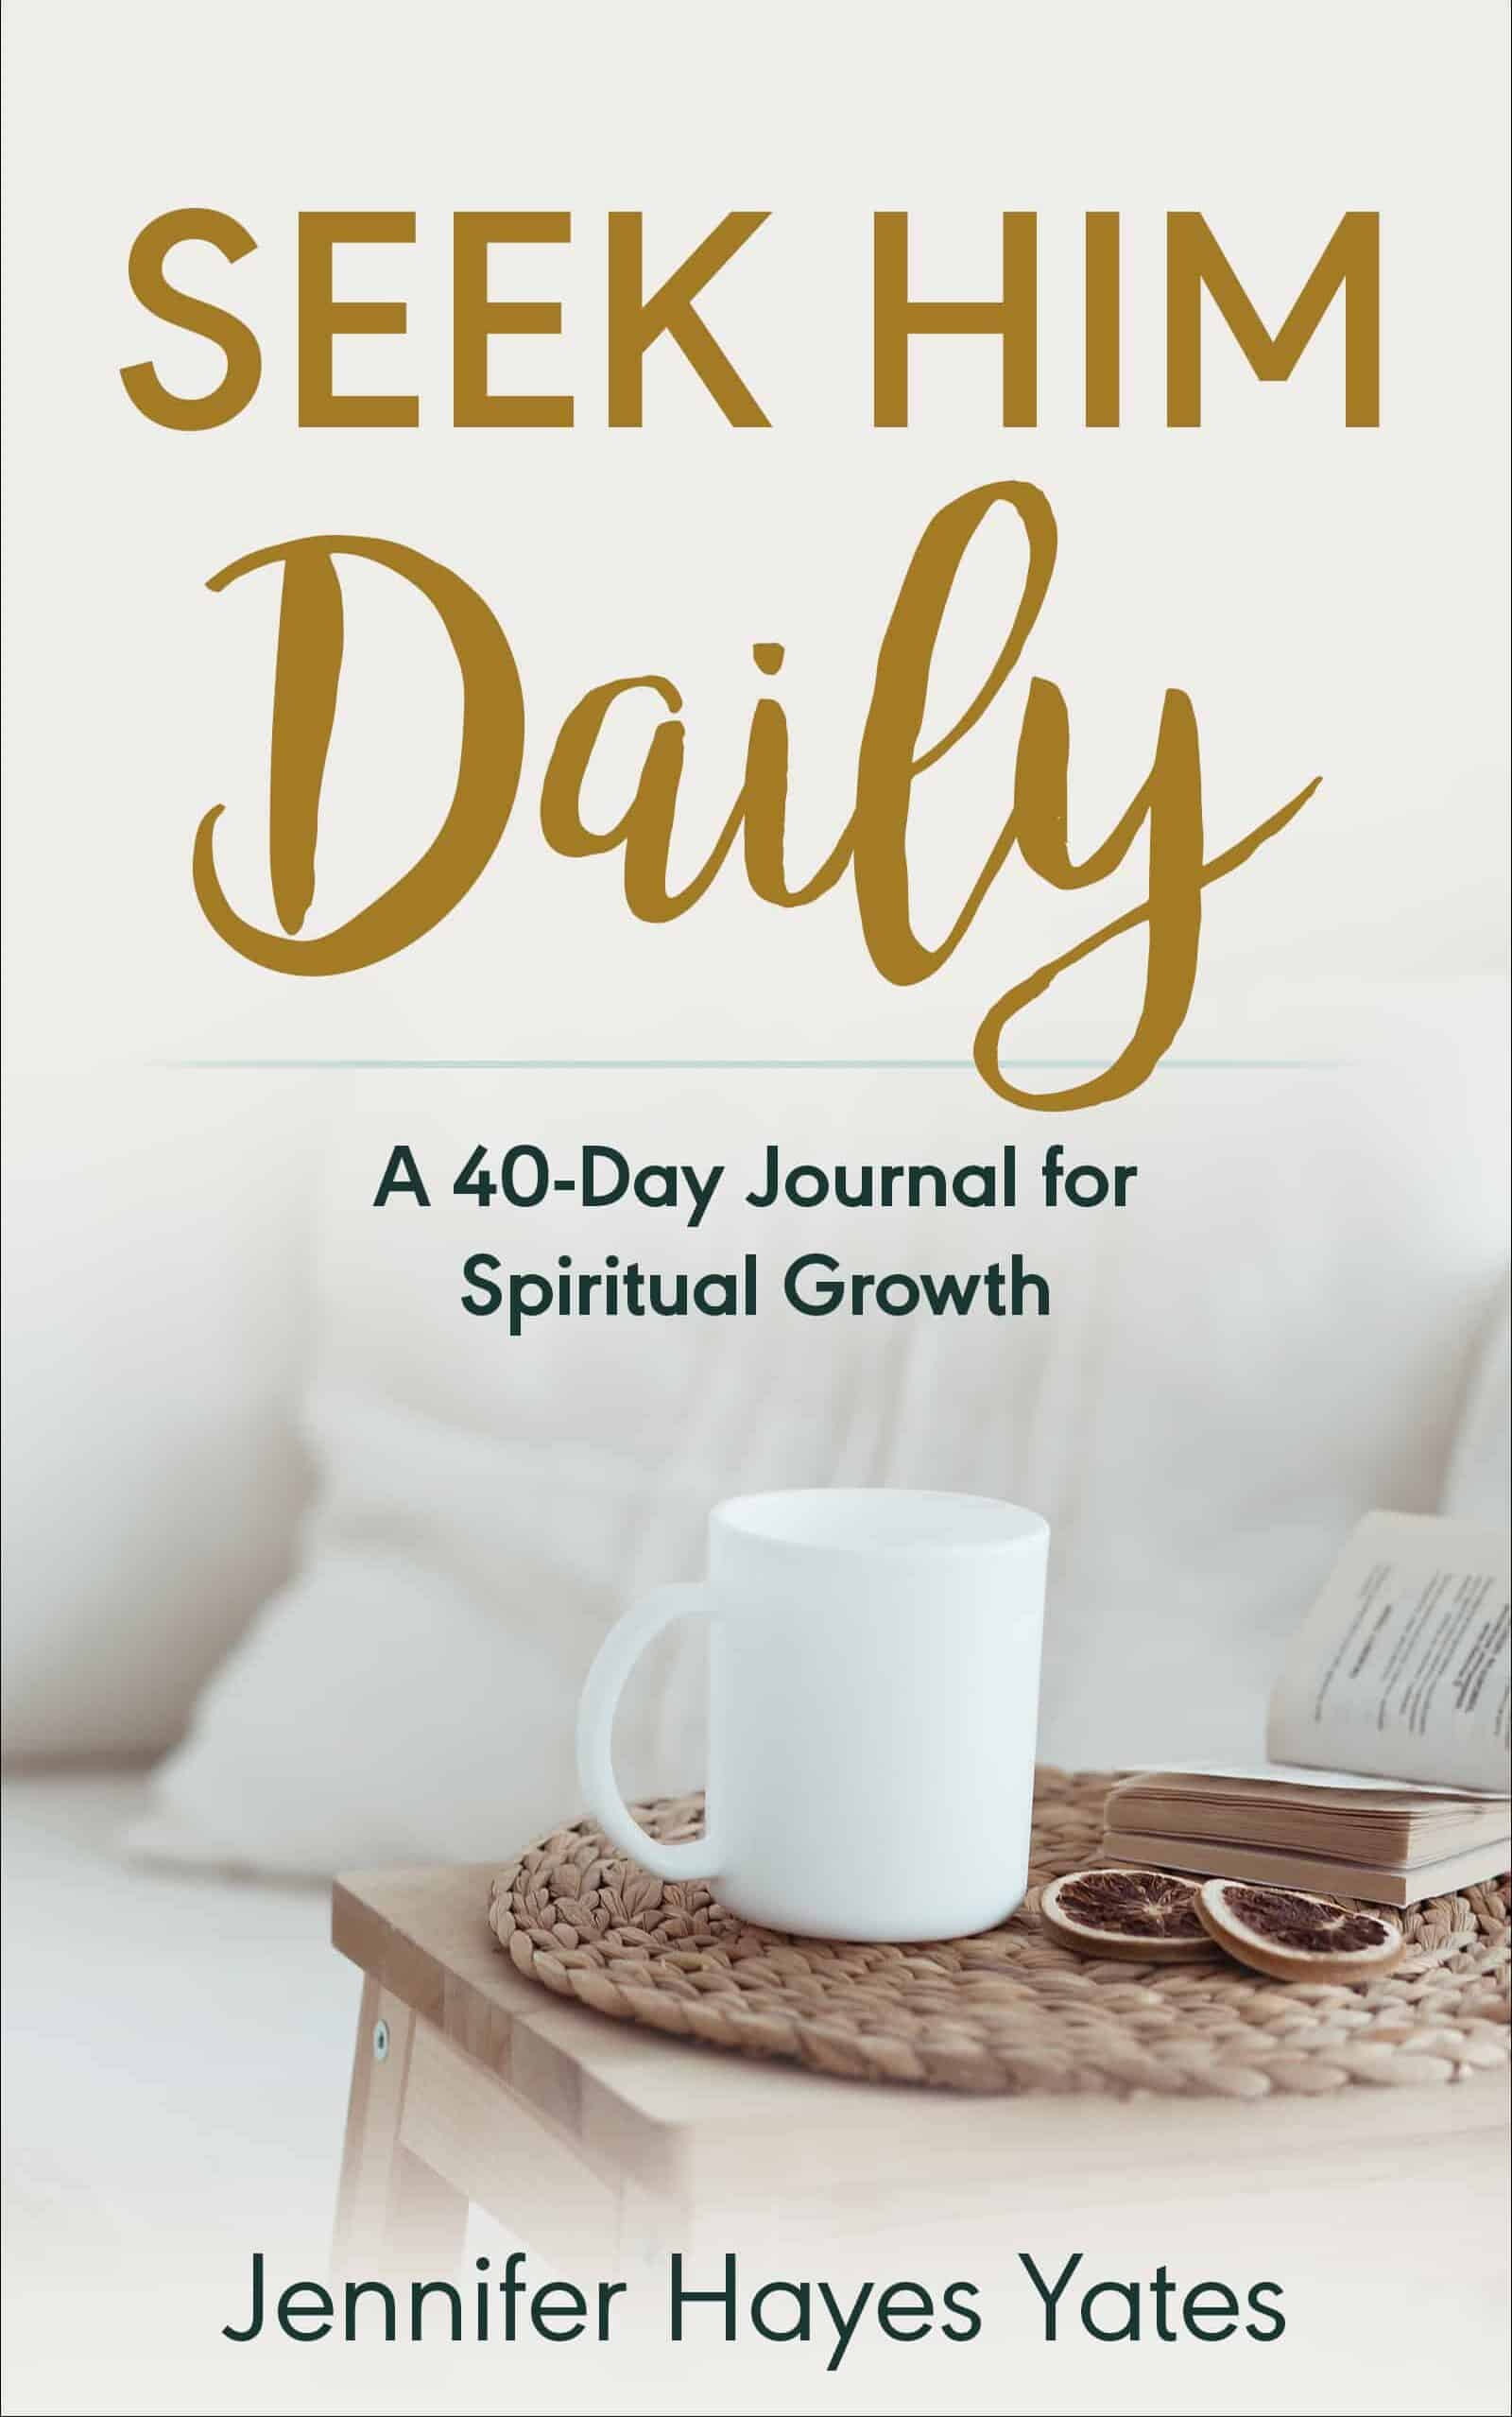 Seek Him Daily: A 40-Day Journal for Spiritual Growth